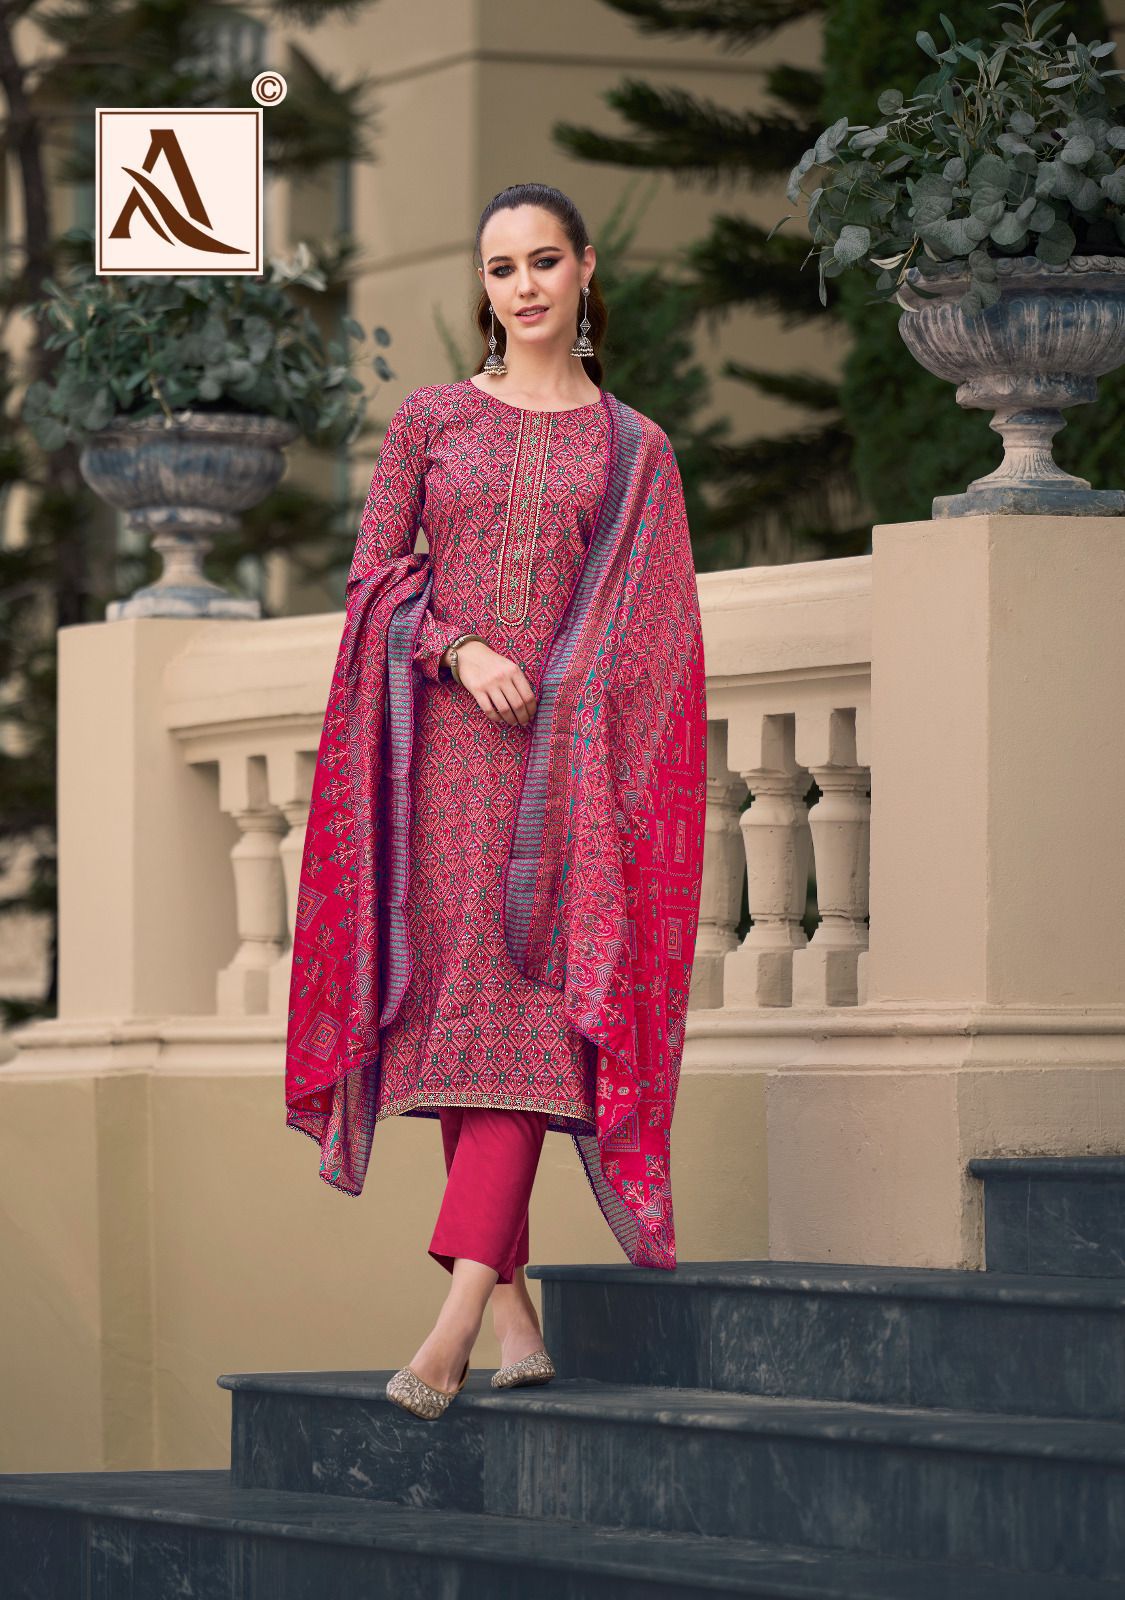 Heer Alok Modal Pant Style Suits